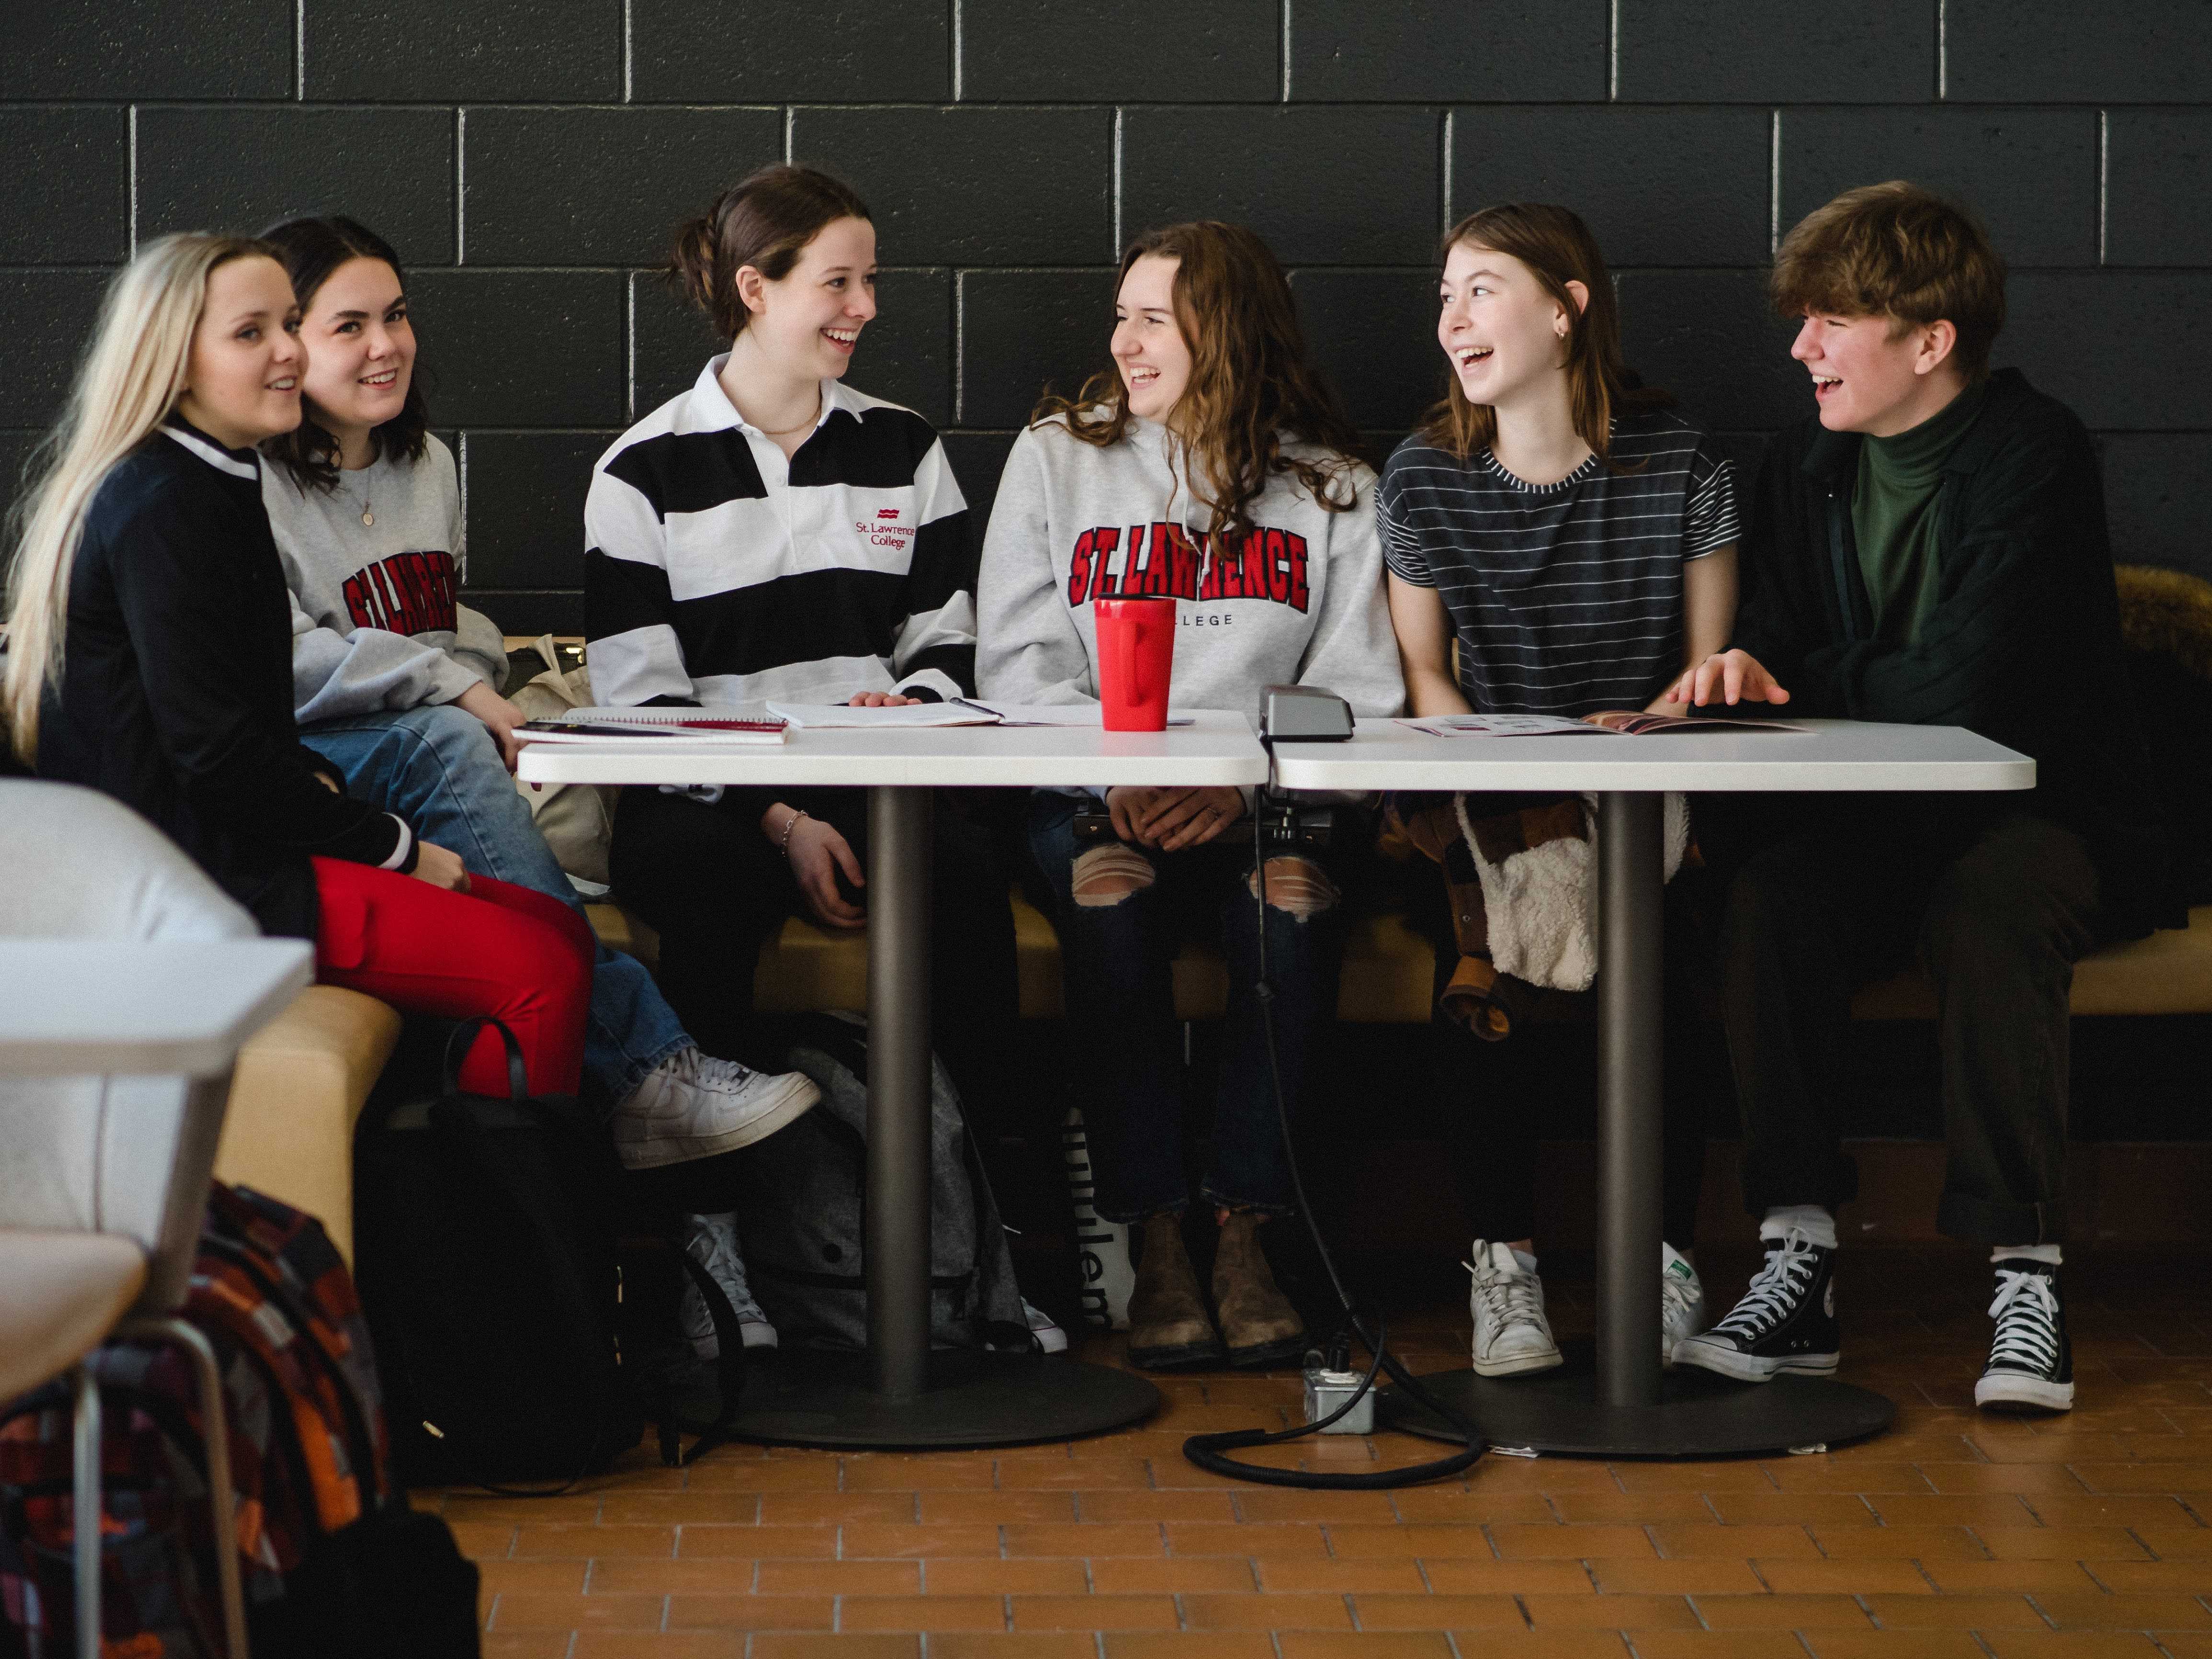 Group of students sitting at a table laughing and smiling